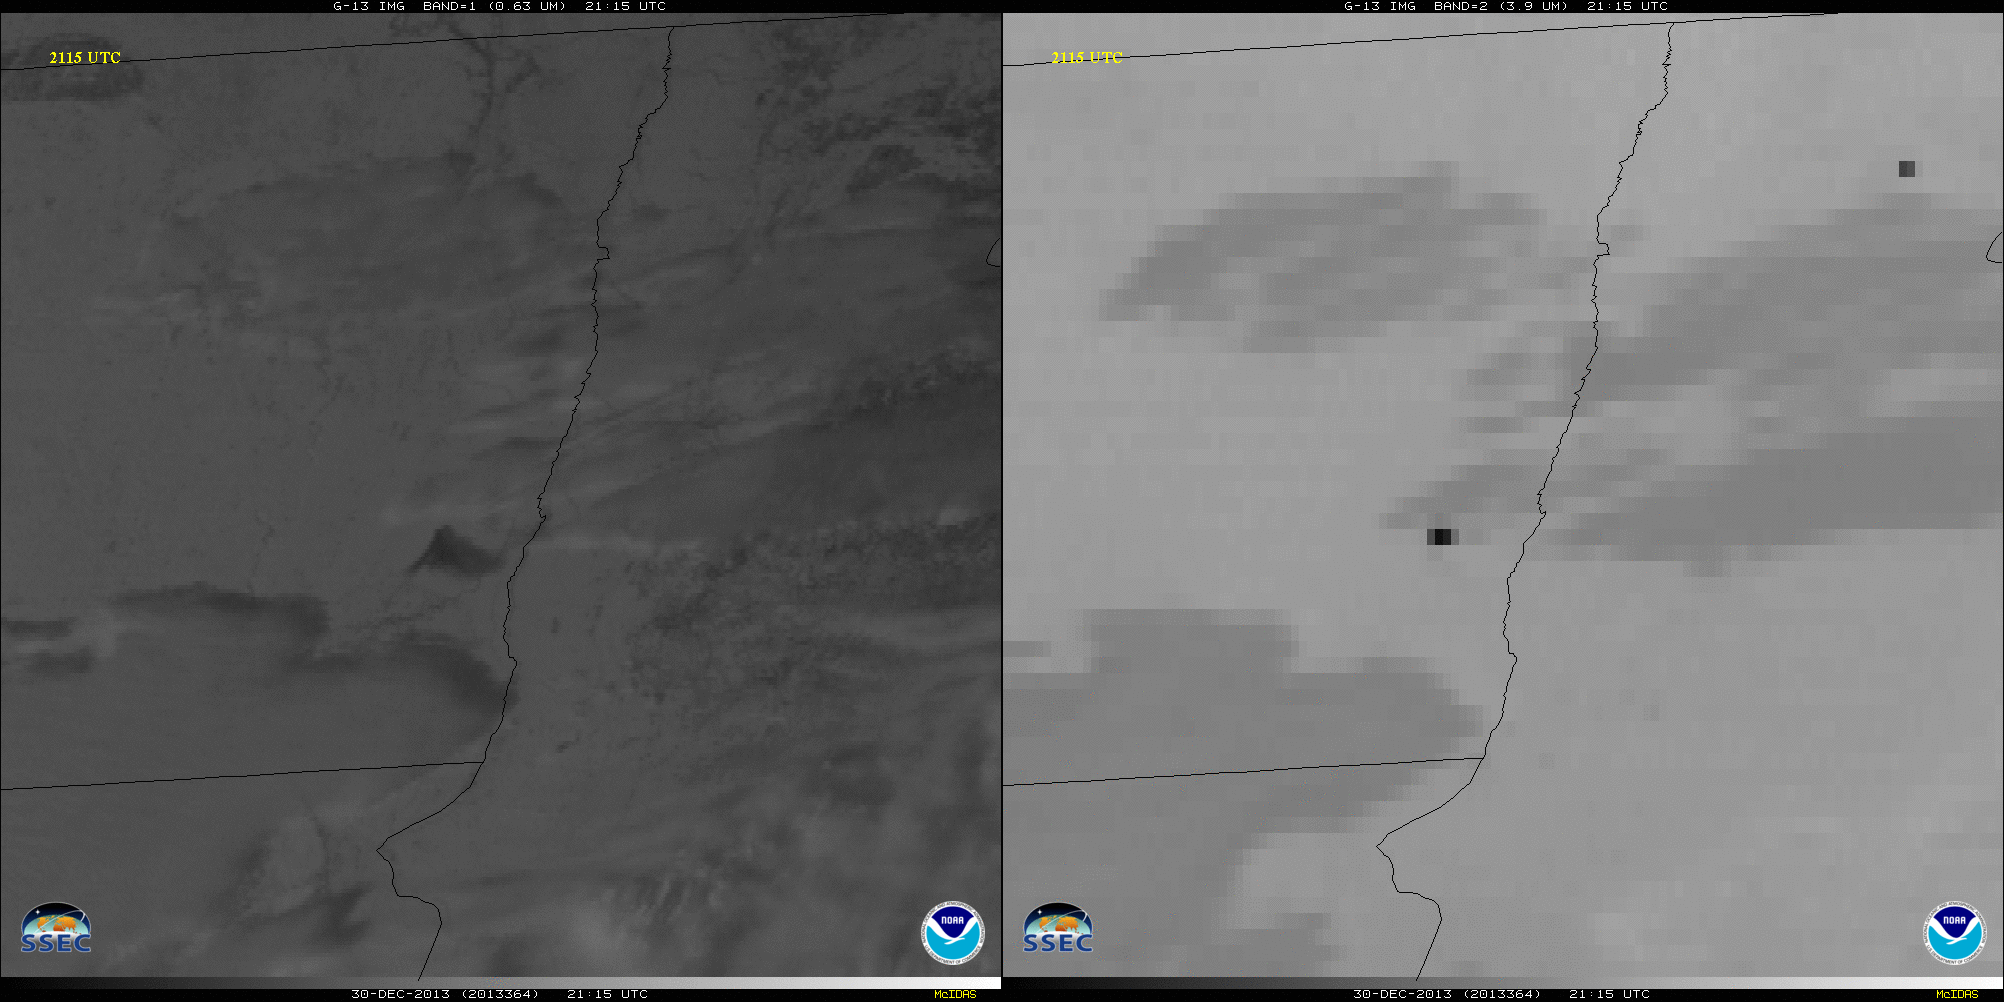 GOES-13 0.63 µm visible channel (left) and 3.9 µm shortwave IR channel (right) images [click to play animation]